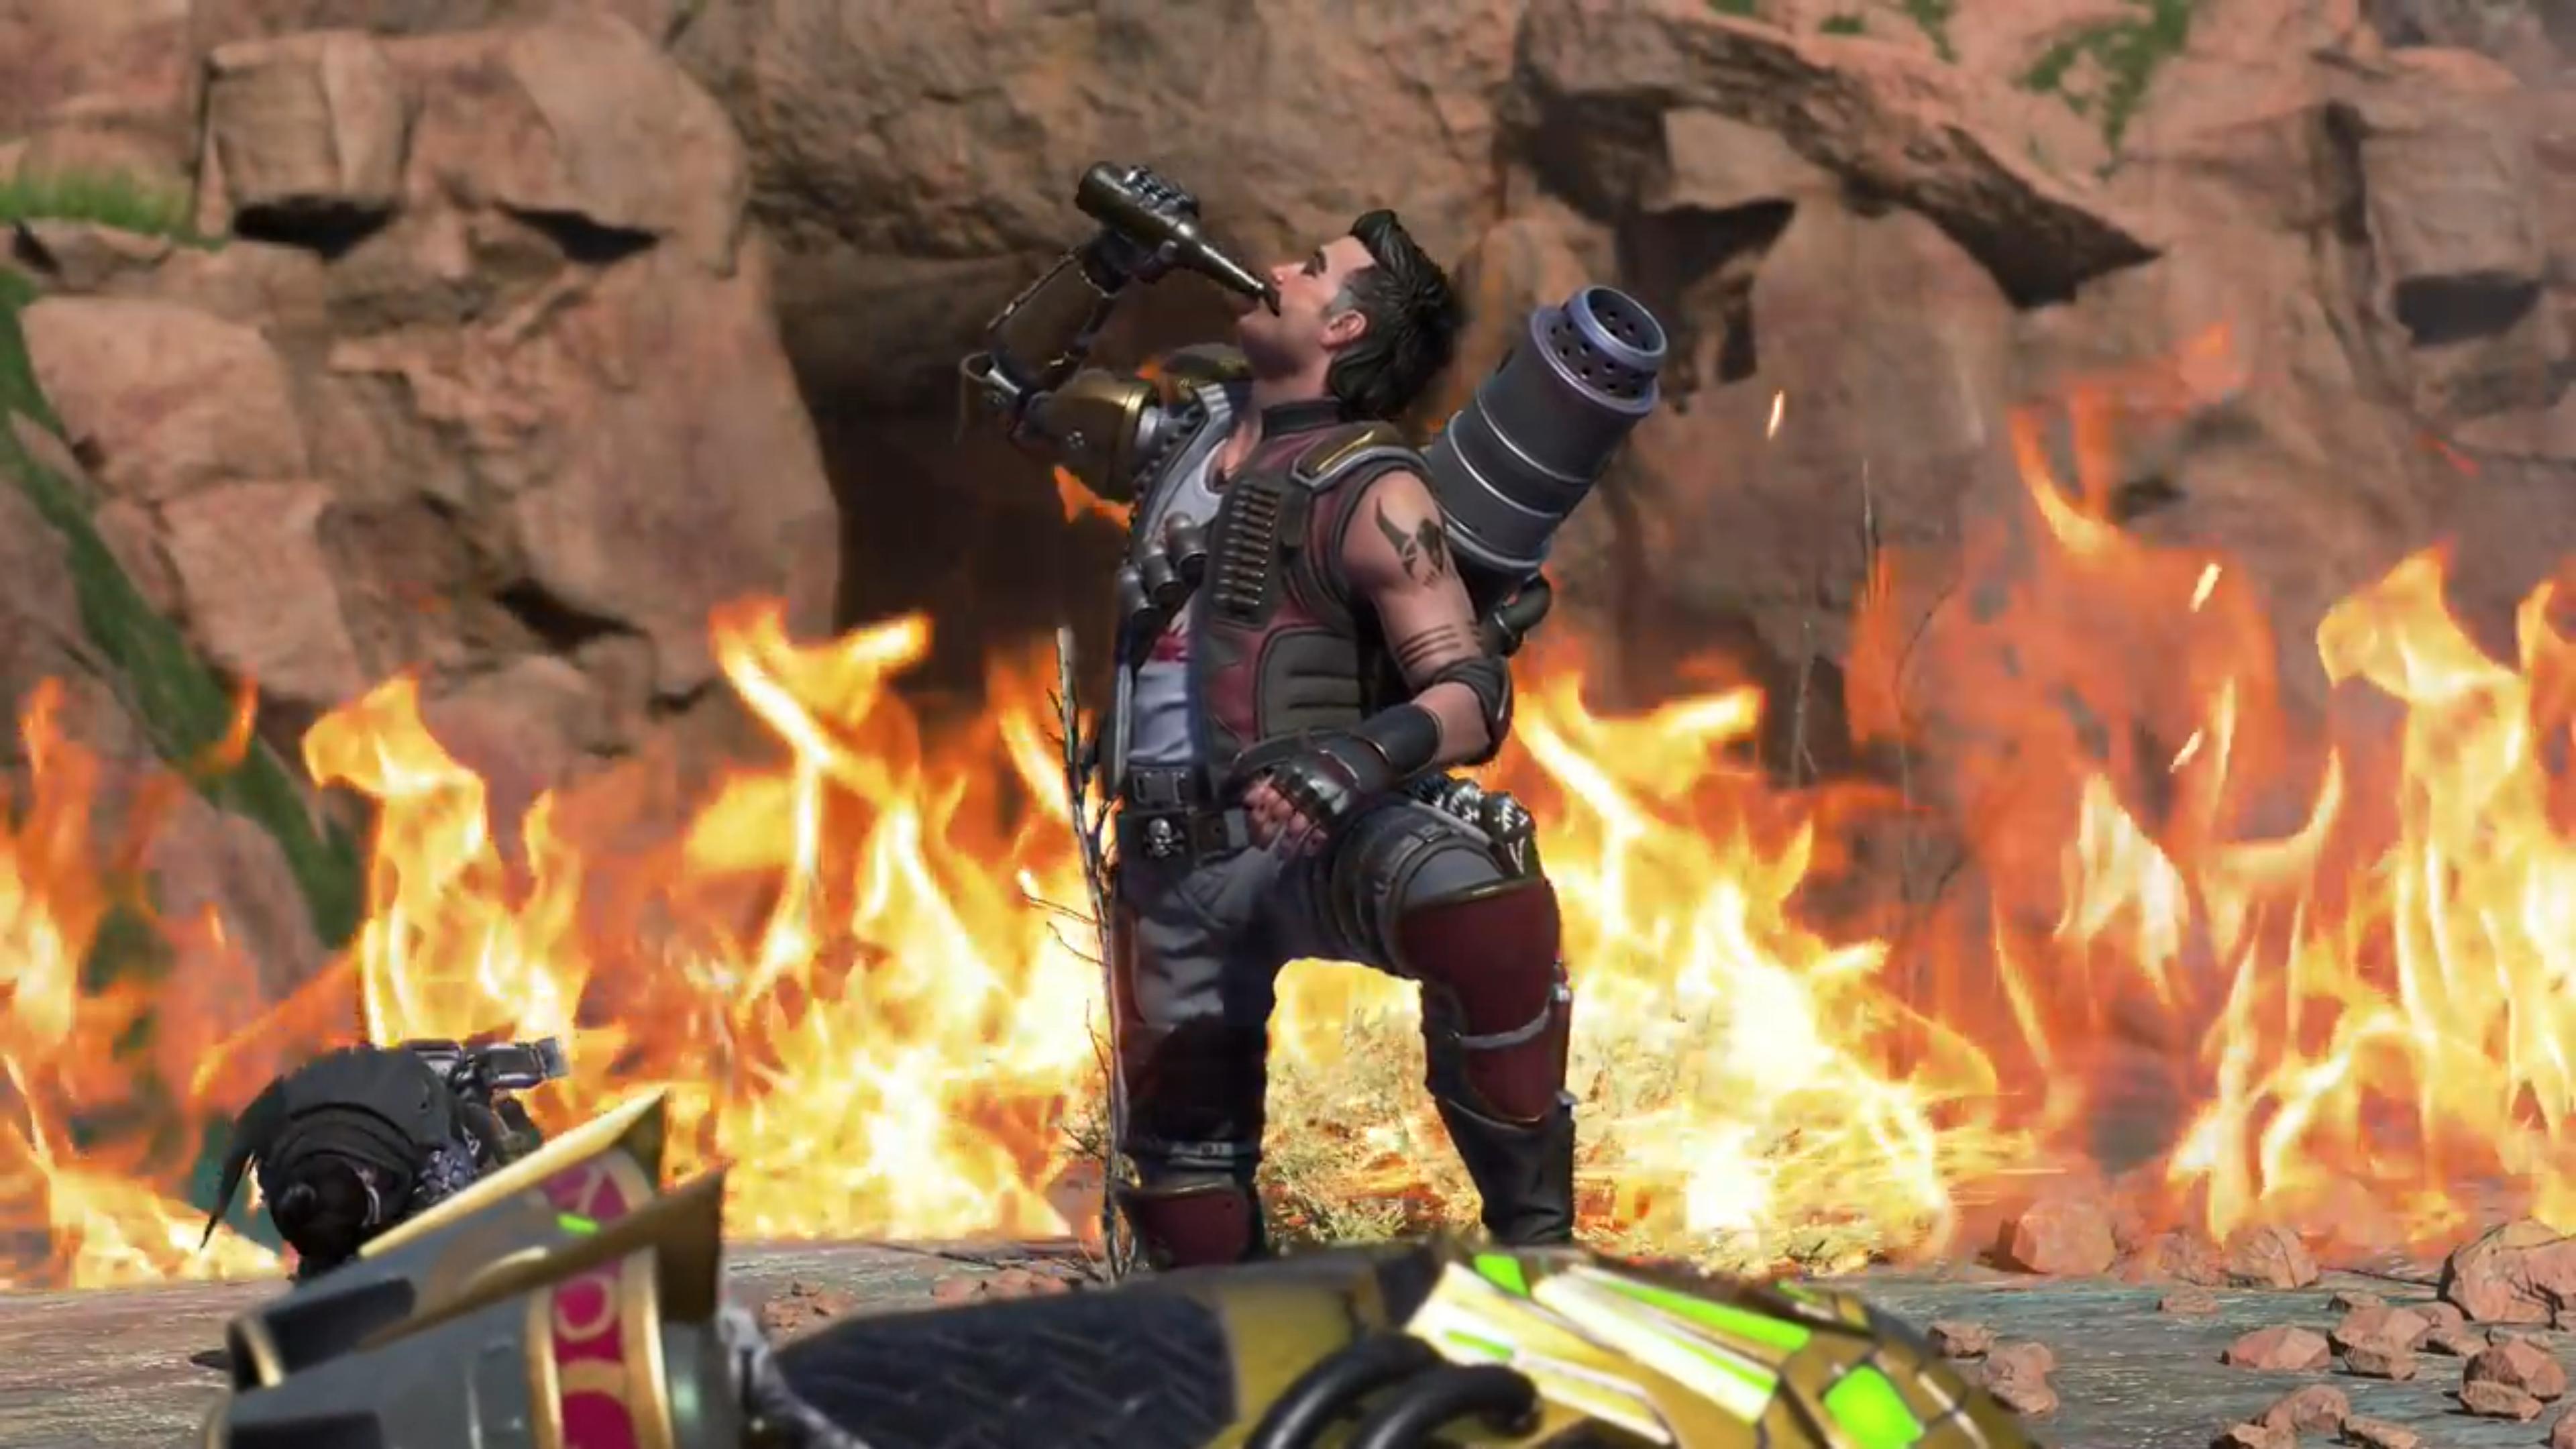  Apex Legends cranks the mayhem up to 11 in its Season 8 gameplay trailer 